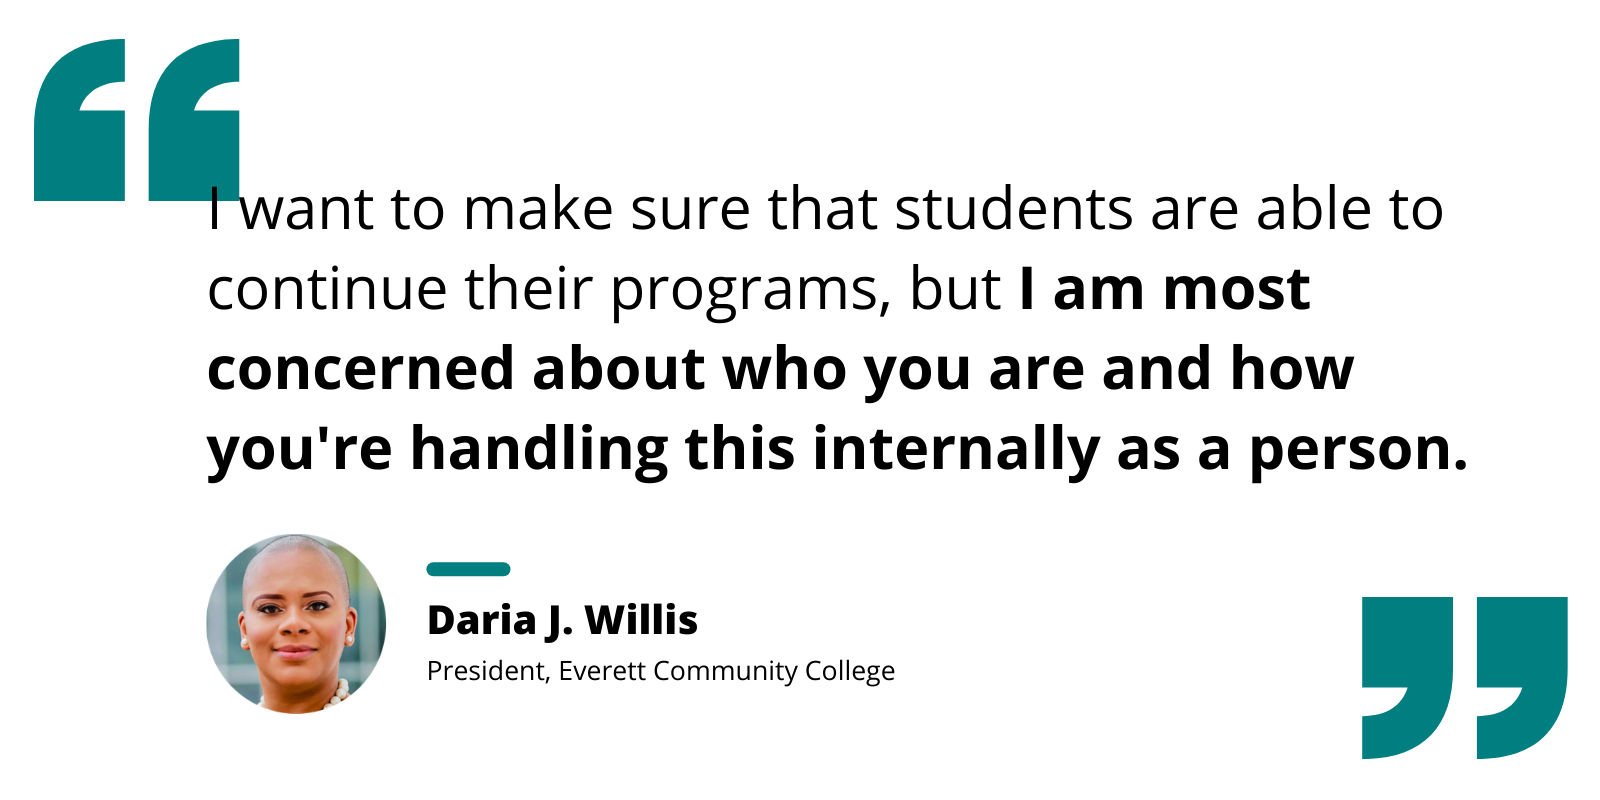 Quote by Daria J. Willis re: looking out for students’ academic interests while caring about their personal well-being.